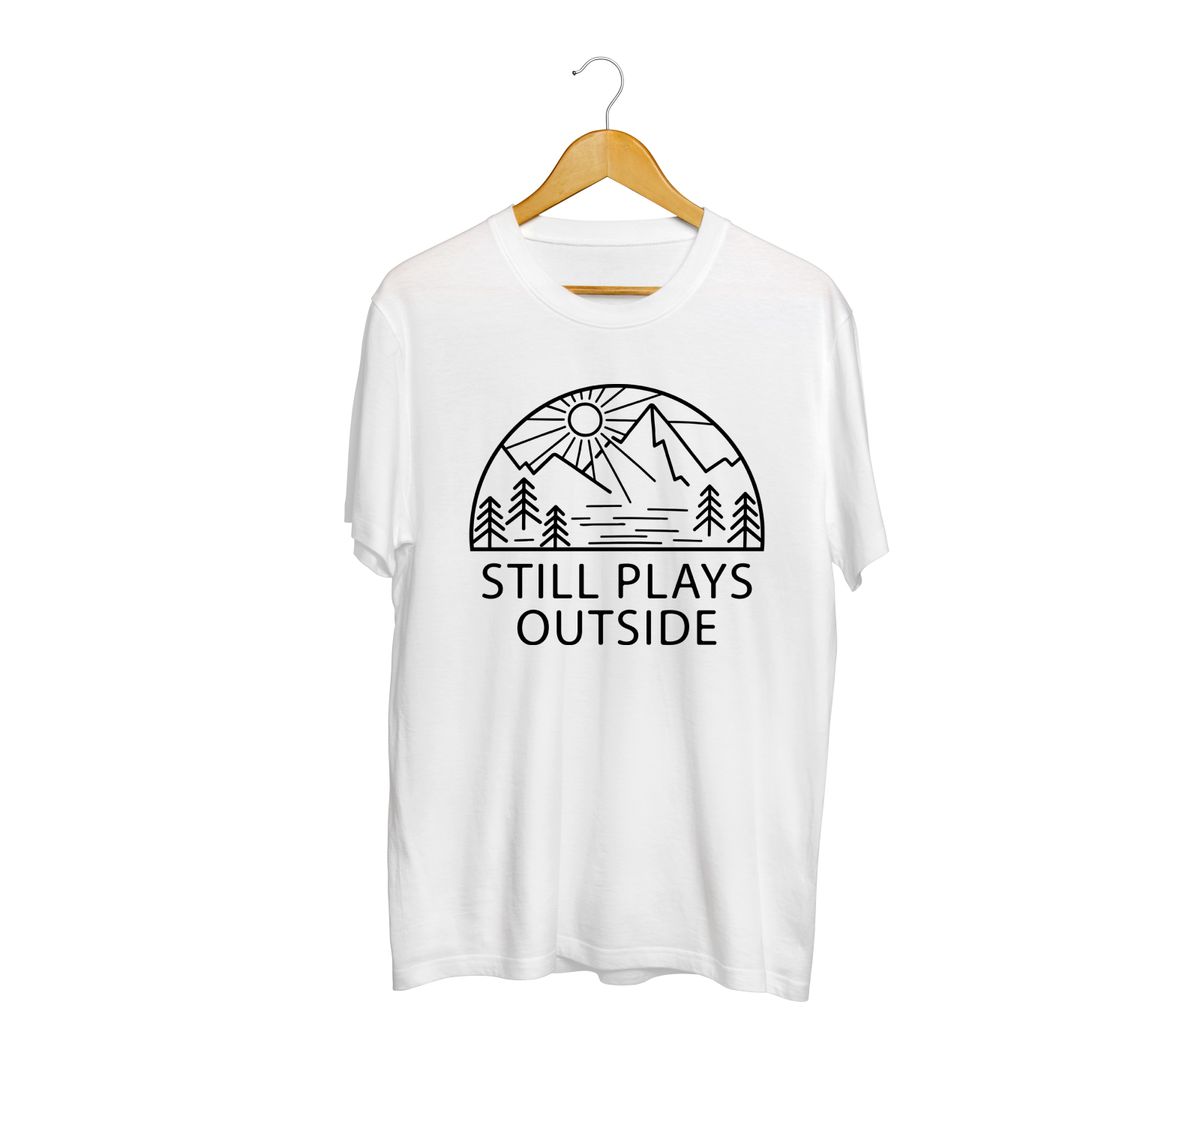 The Overland Club White Plays T-Shirt image 1